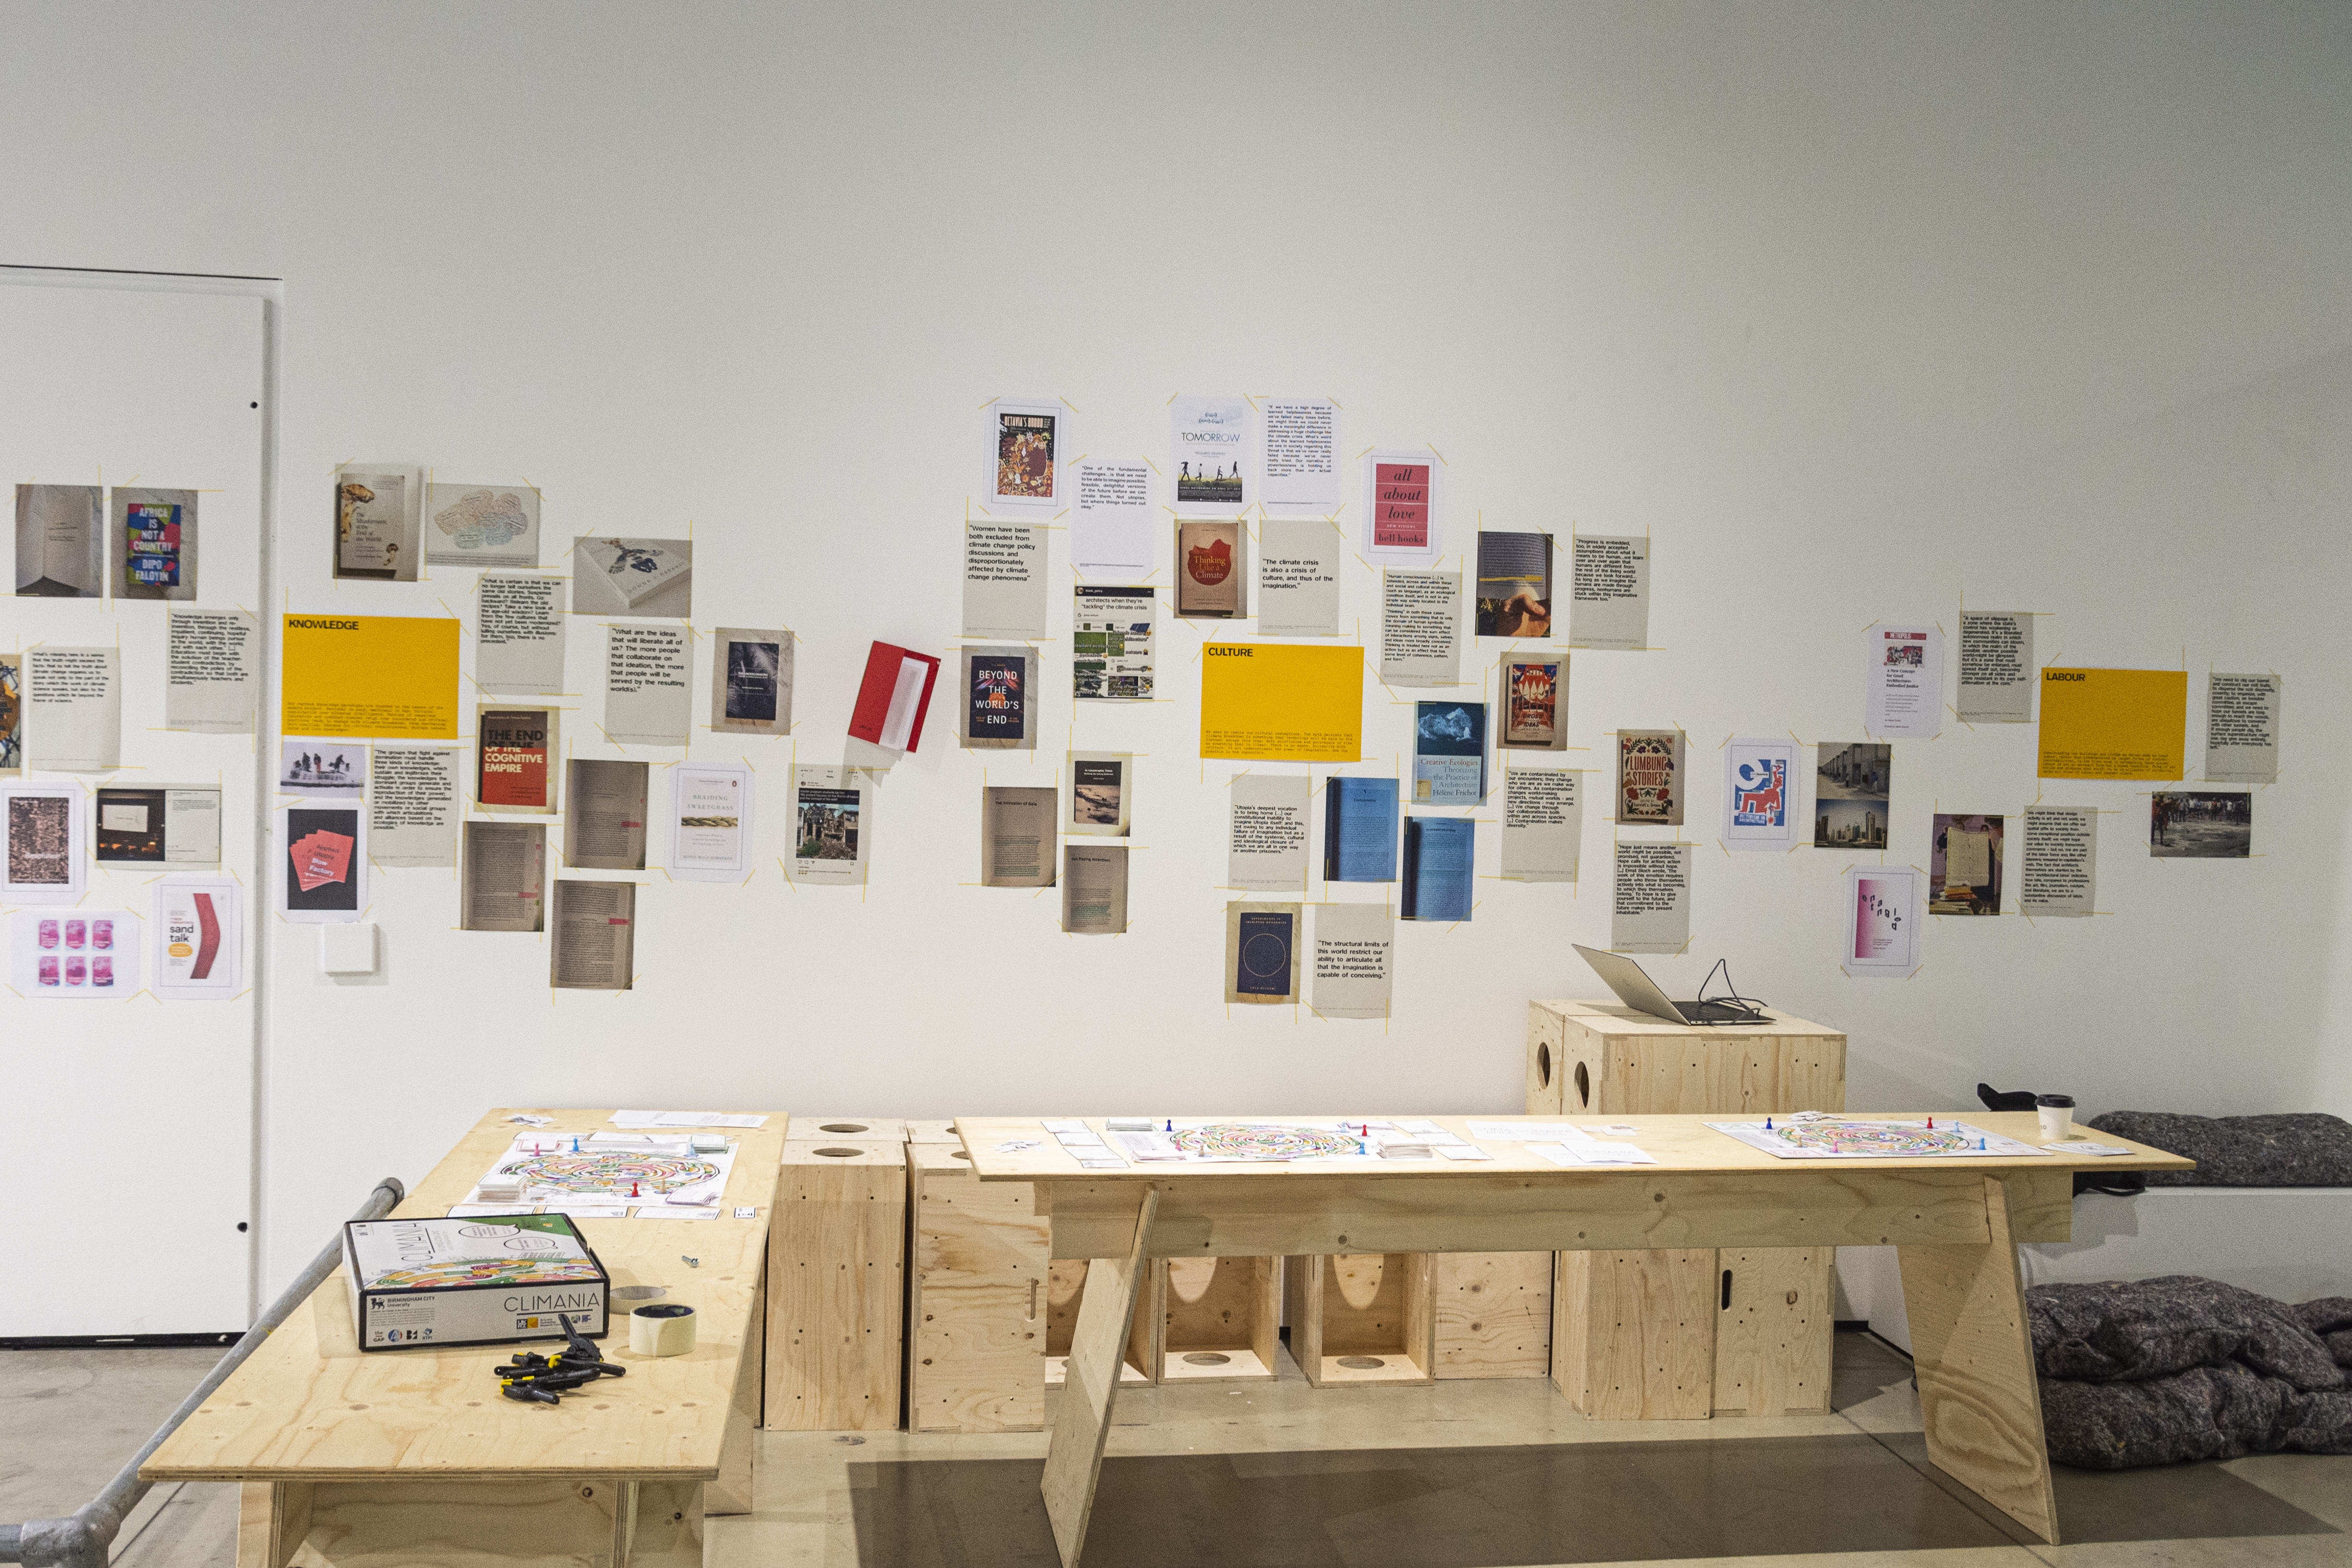 An exhibition space with lots of colourful posters hanging on the wall next to a wooden bench